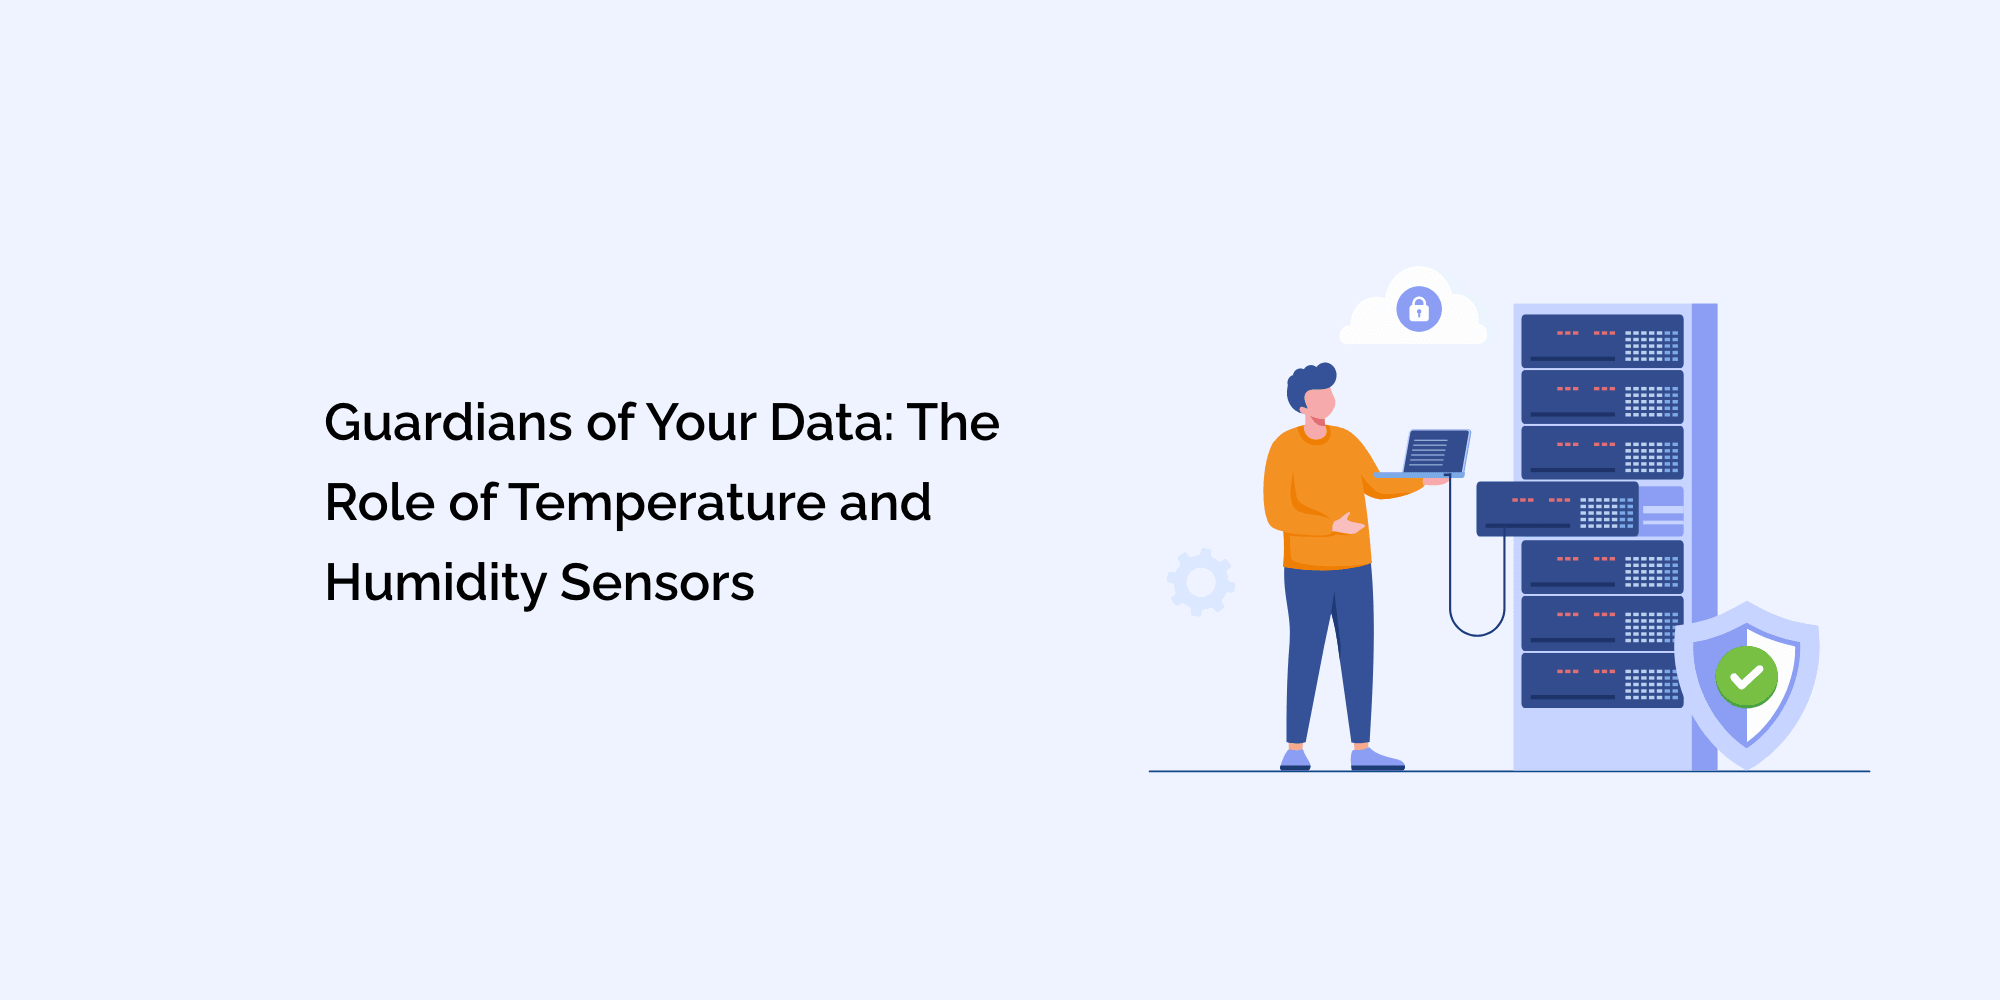 Guardians of Your Data: The Role of Temperature and Humidity Sensors